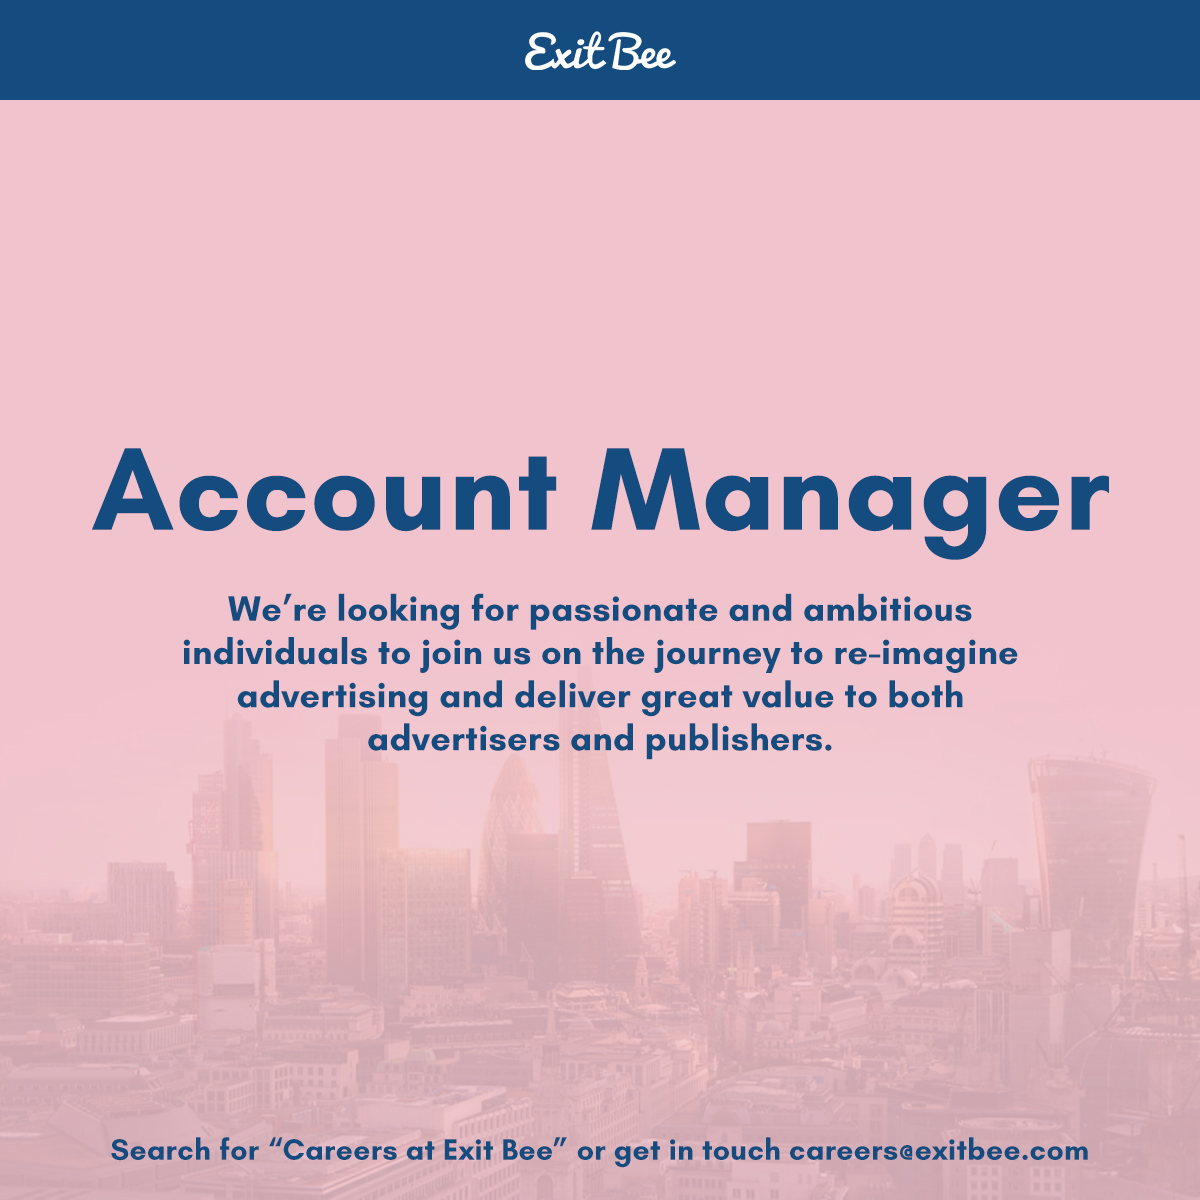 account-manager-london-uk-exit-bee-careers